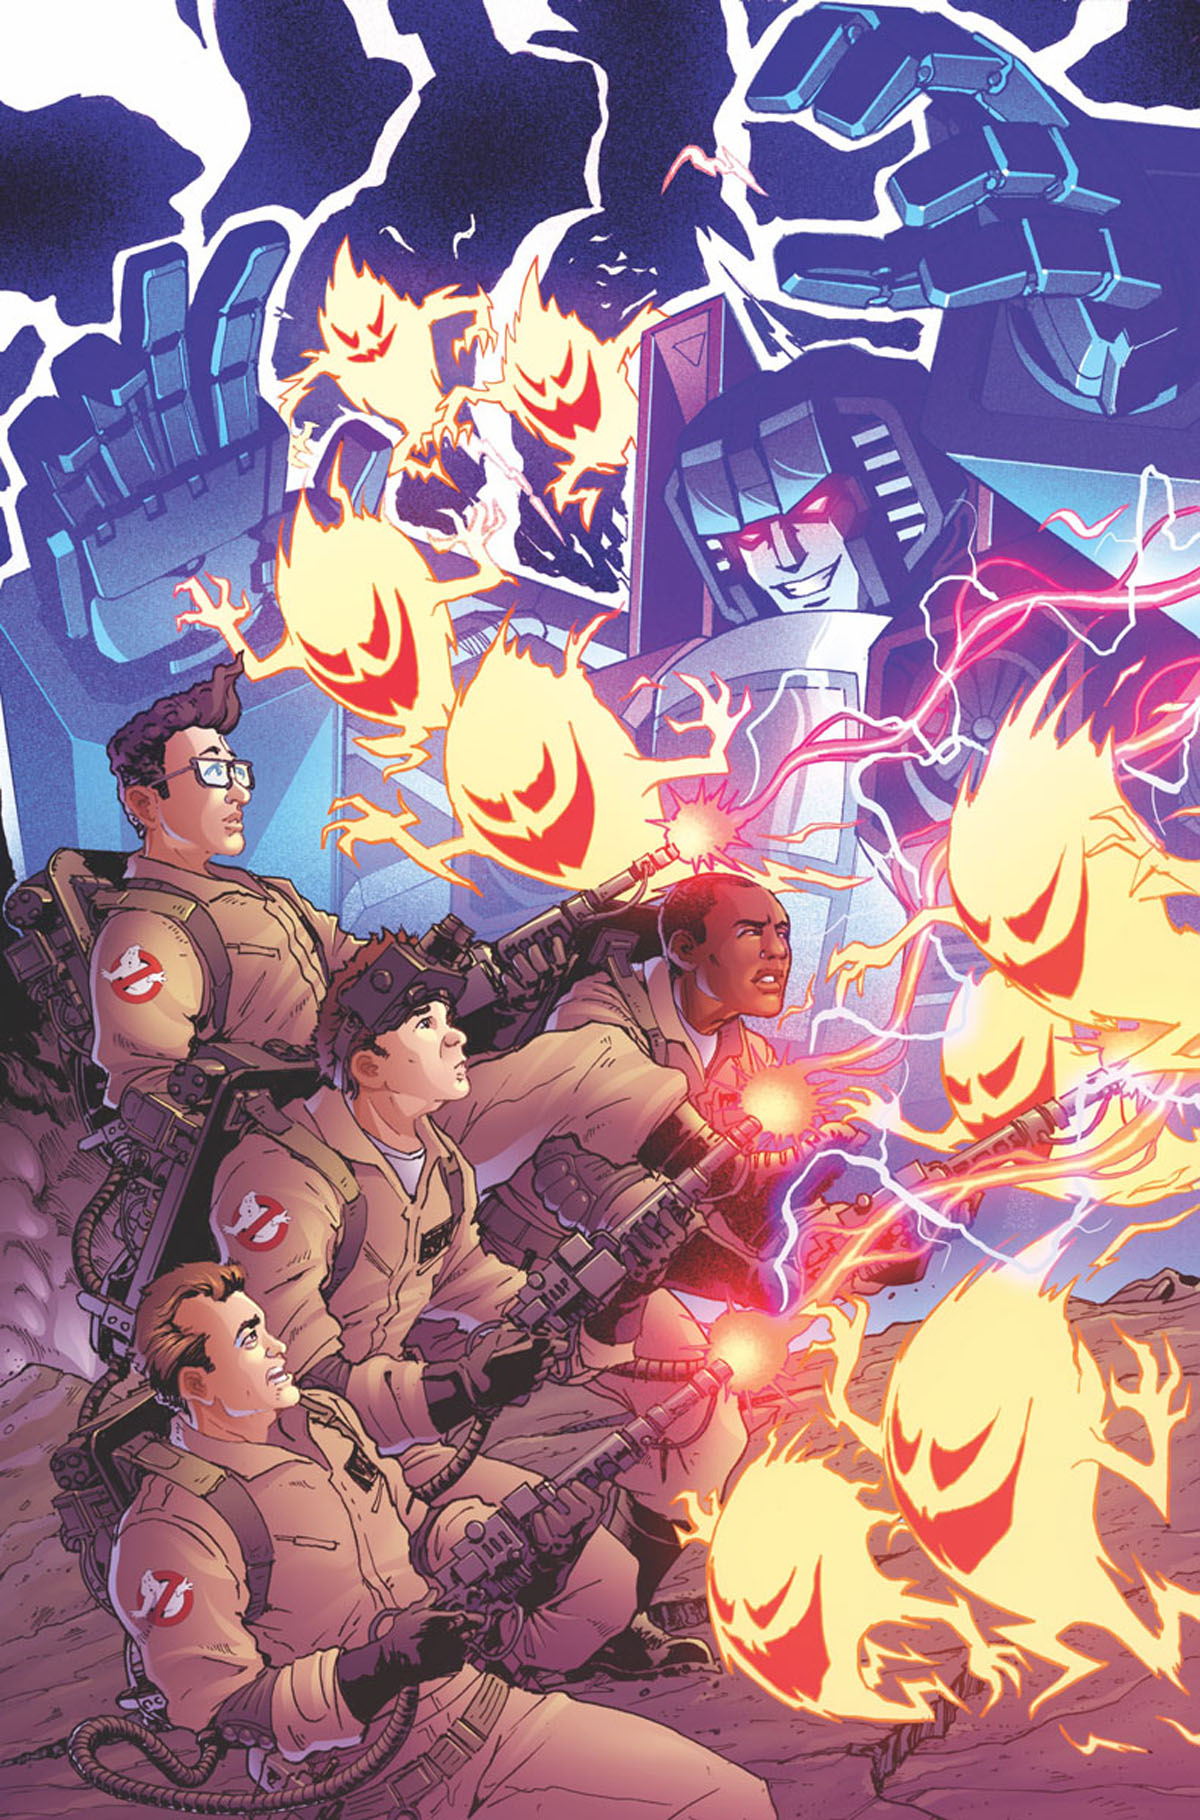 Transformers/Ghostbusters #1 cover